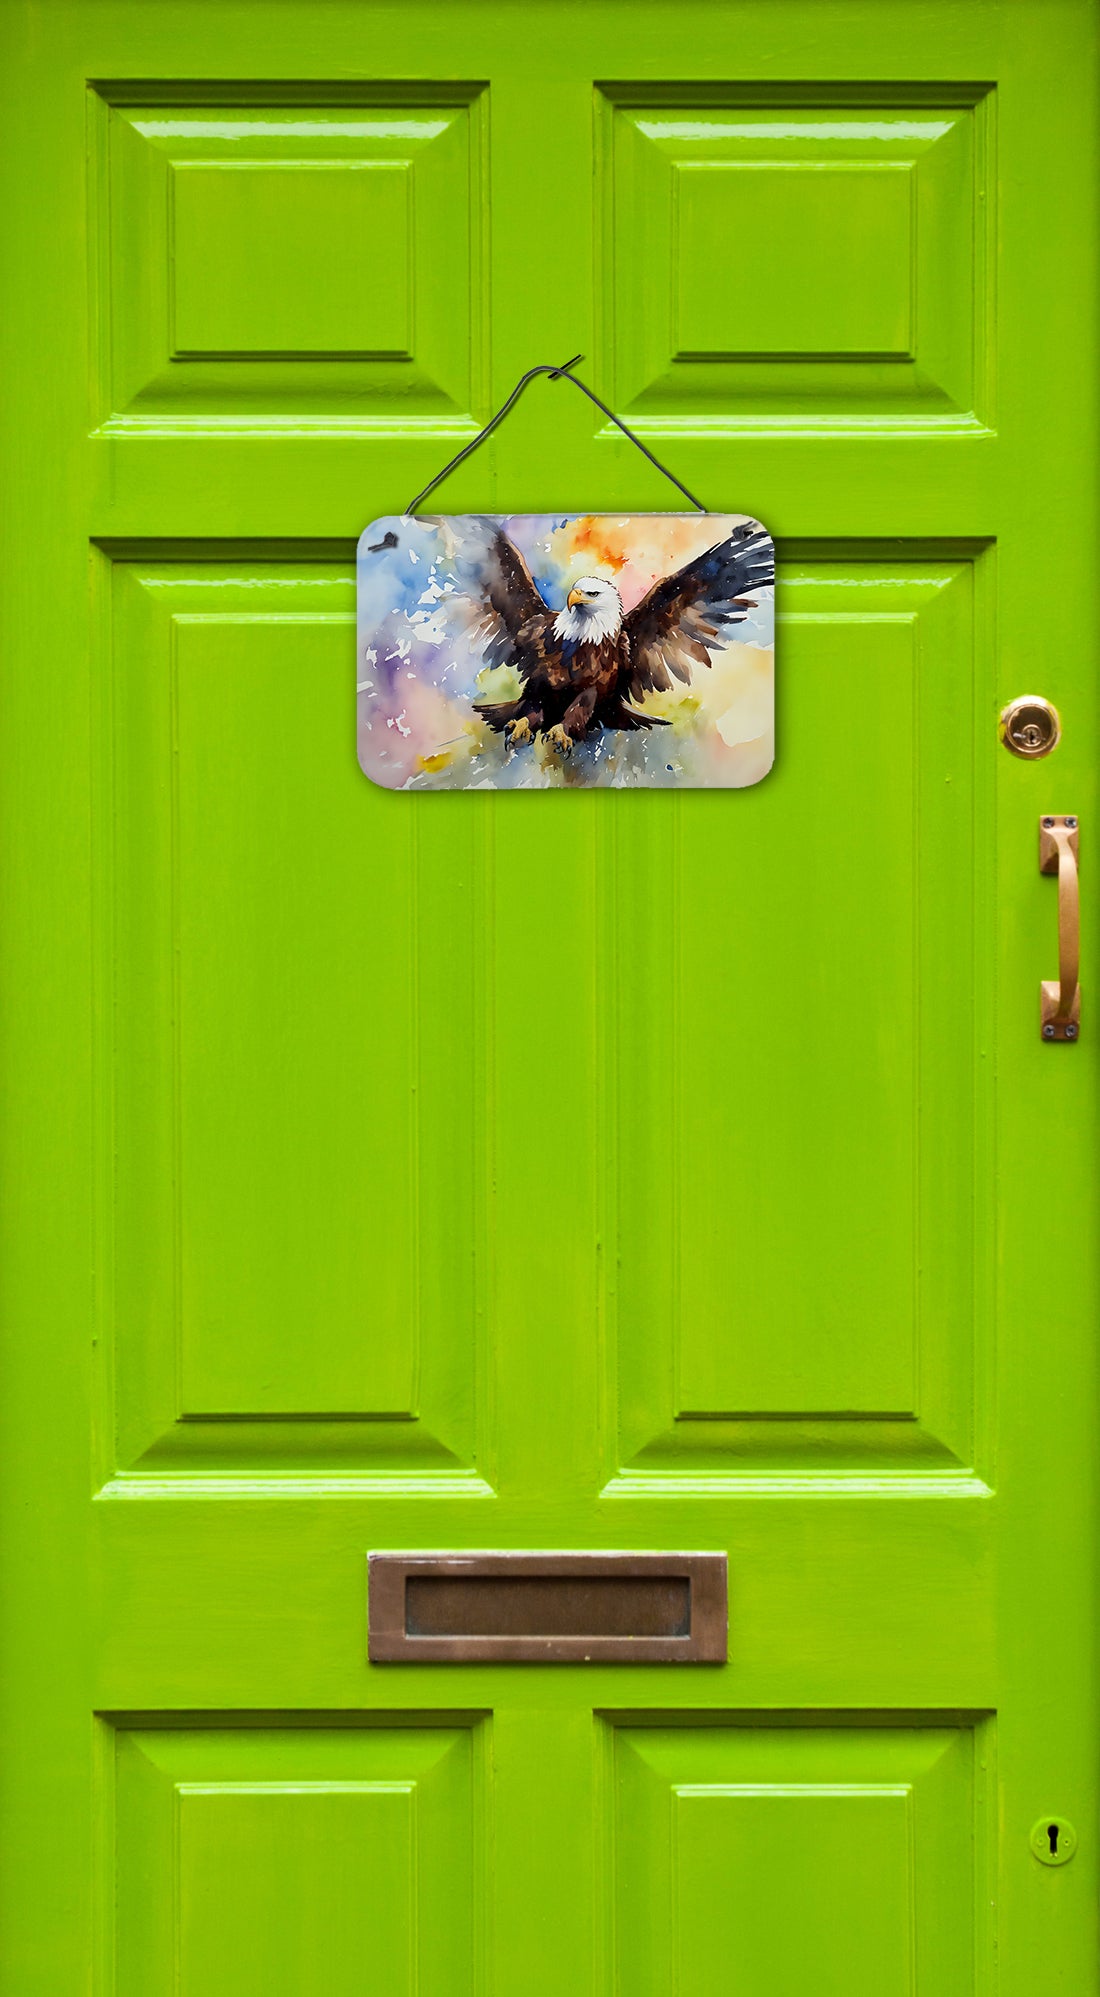 Buy this Eagle Wall or Door Hanging Prints